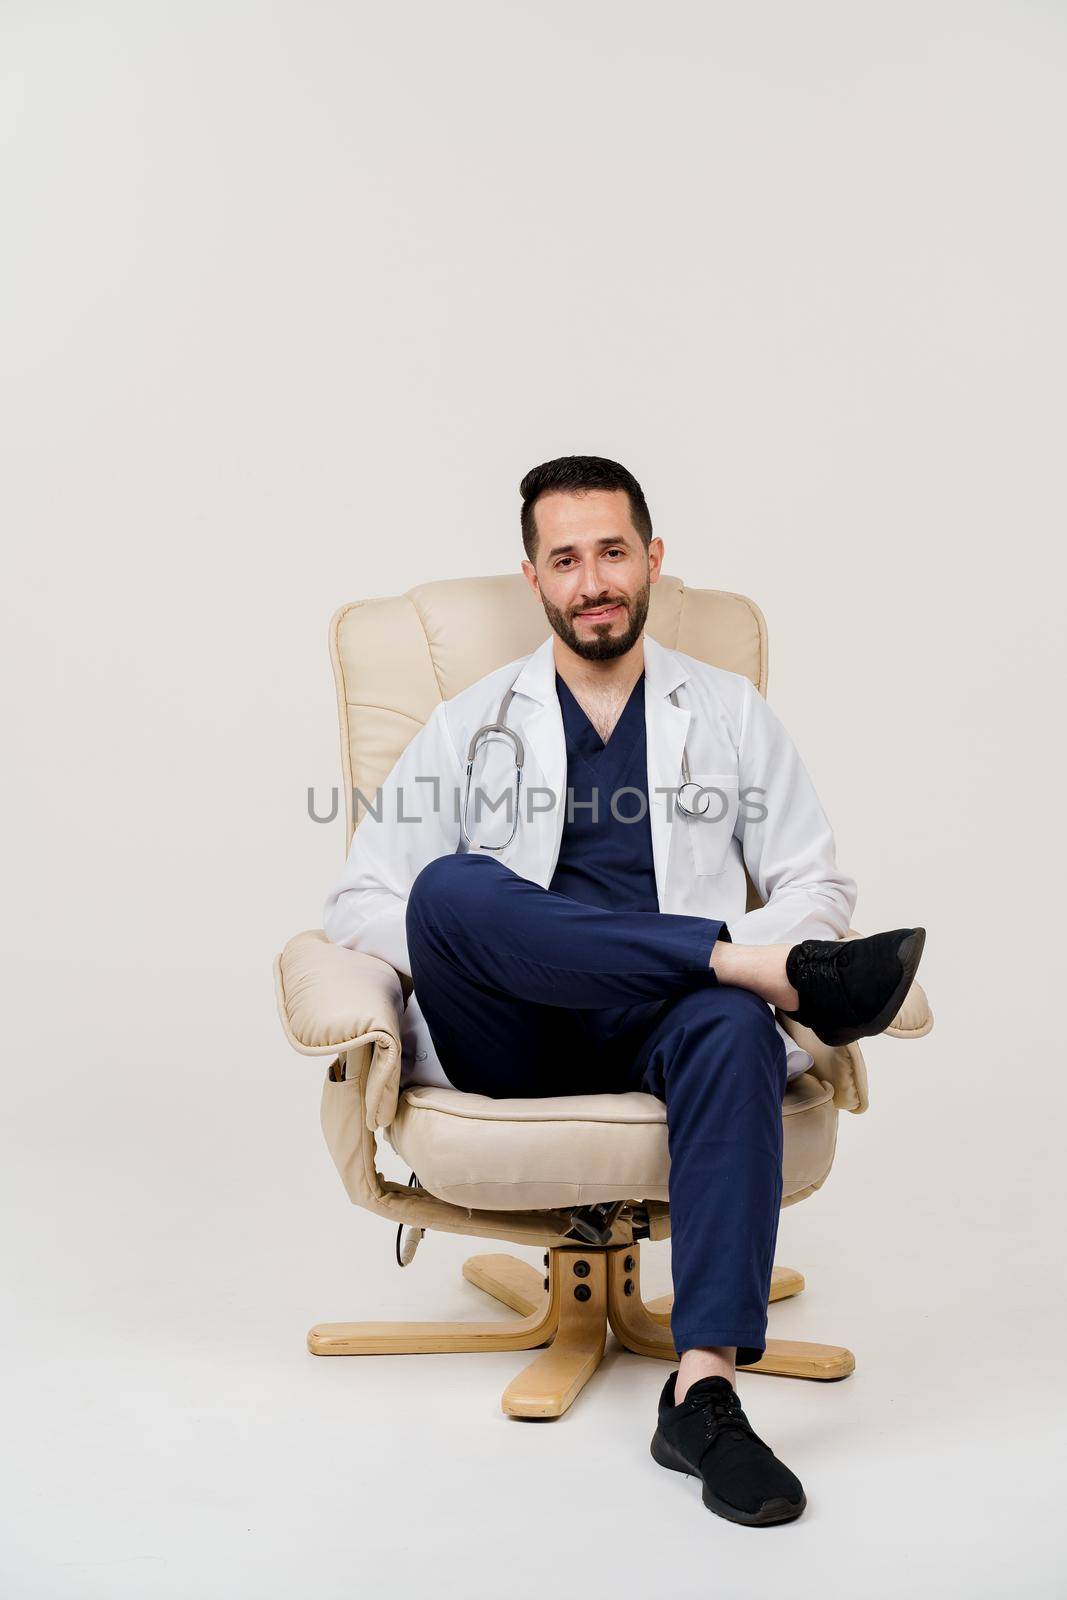 Arabian doctor surgeon in medical robe with stethoscope seats in armchair in studio on white blanked background. Handsome arab on white background